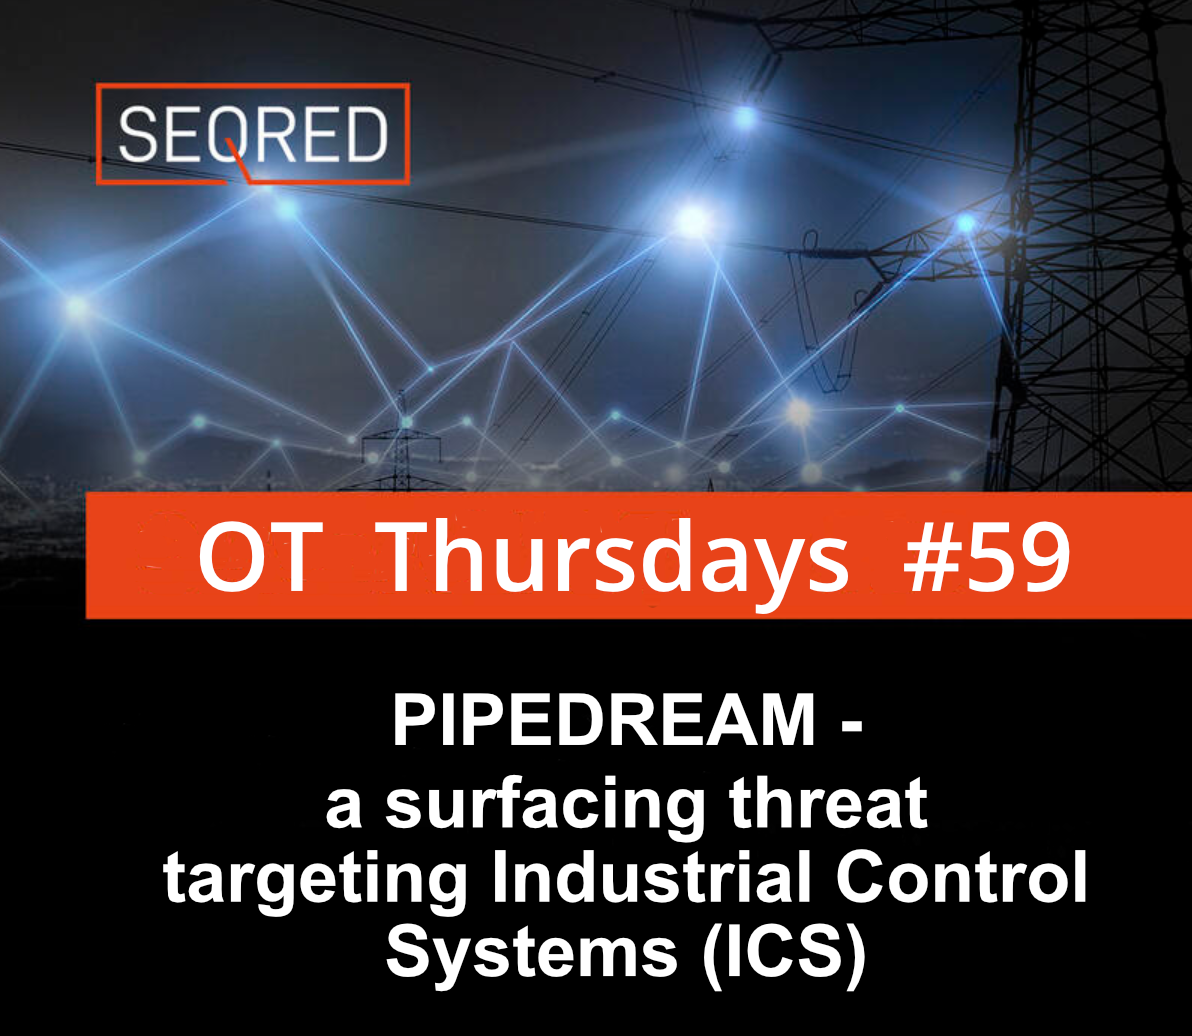 PIPEDREAM - a surfacing threat targeting Industrial Control Systems (ICS)